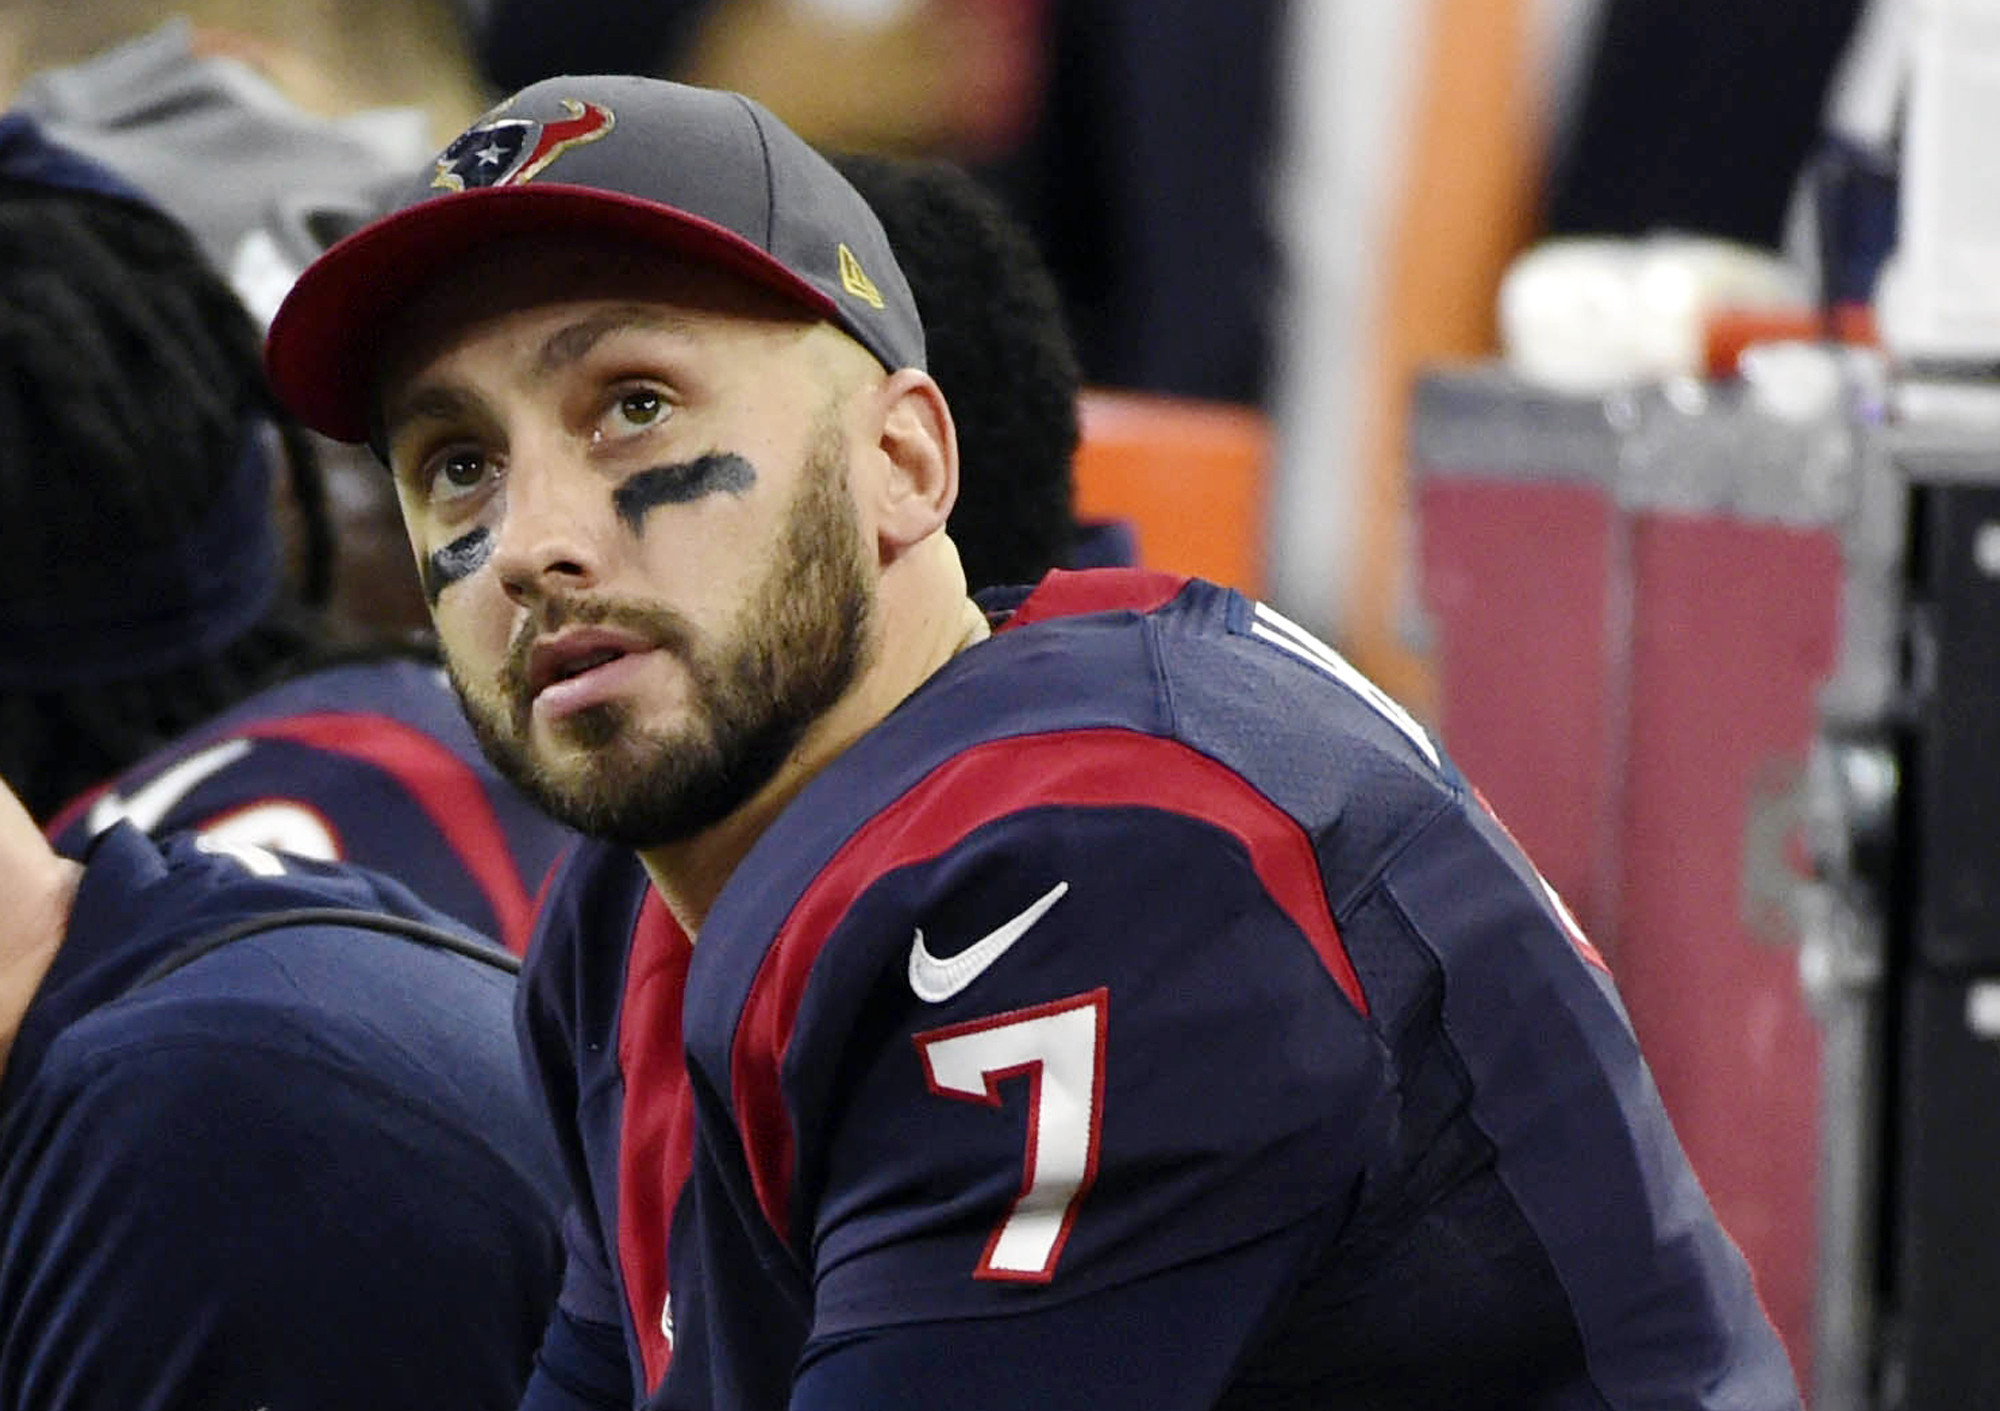 Bears agree to deal with quarterback Brian Hoyer as Jay Cutler's backup - Chicago Tribune